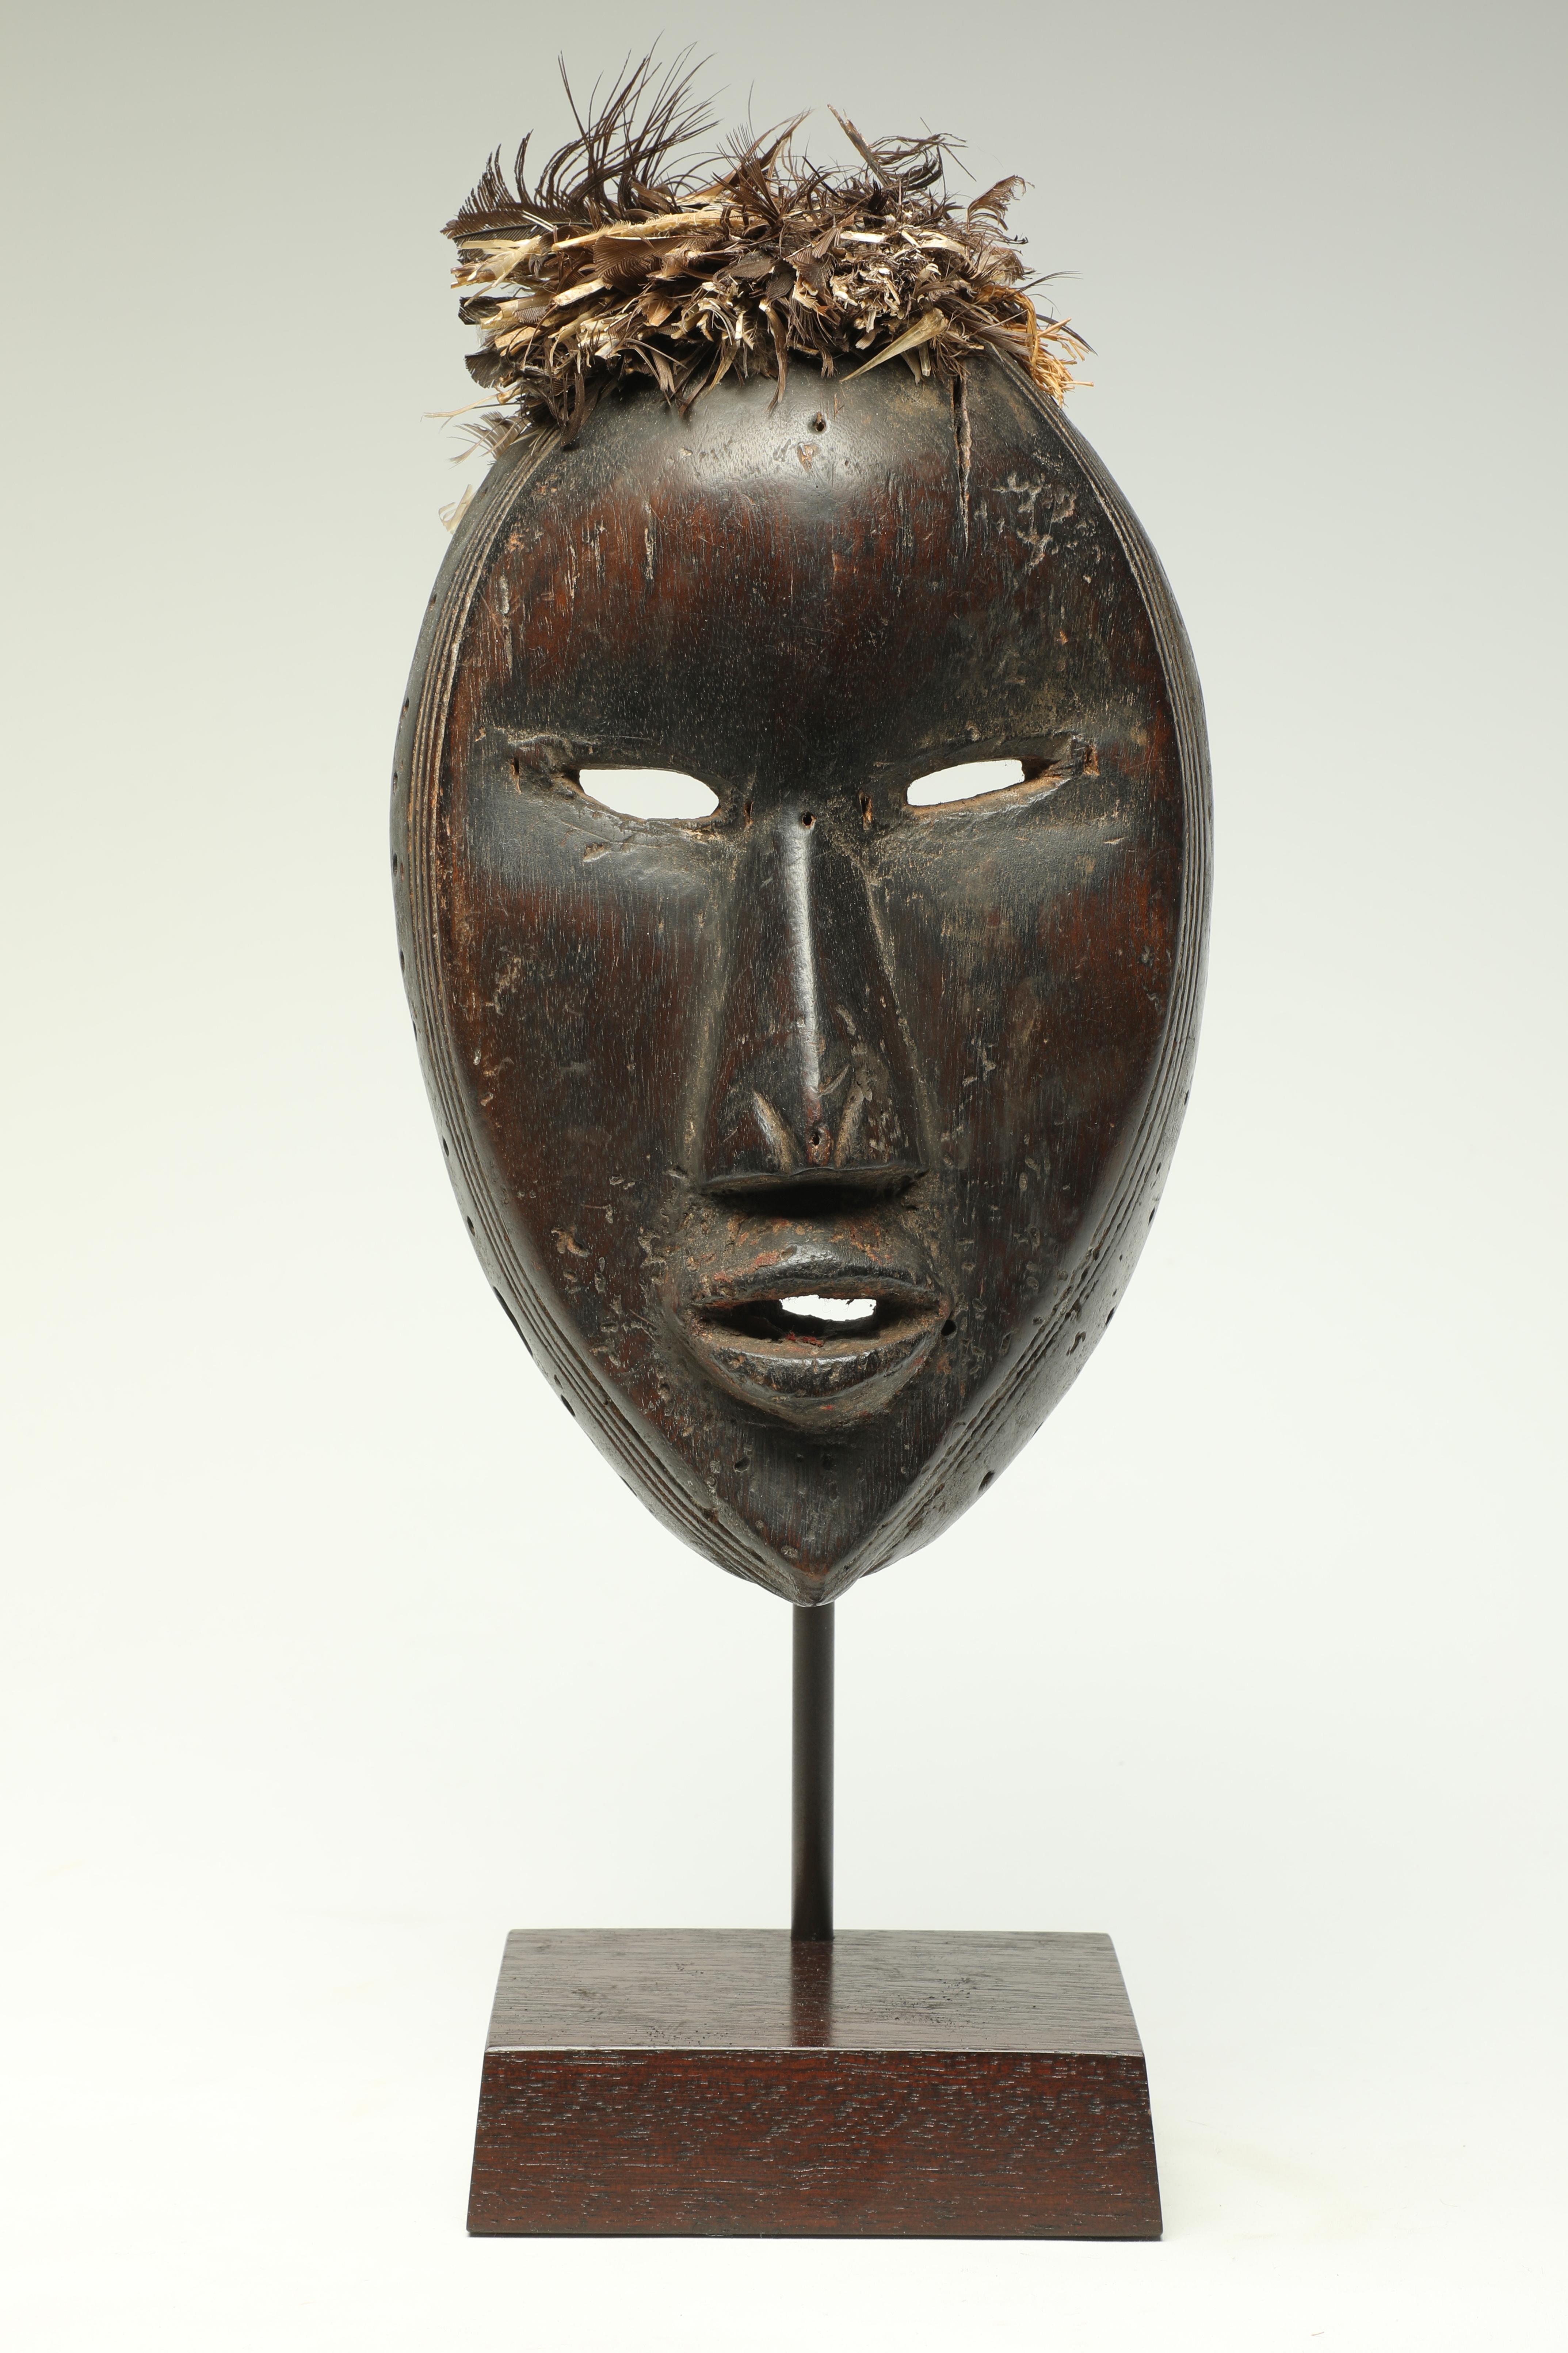 Expressive early classic cubist Dan mask with refined expressive look, narrow open eyes and mouth and fine line scarification marks around outside of face. Created early 20th century by the Dan People of Liberia and Cote d'Ivoire. ex private